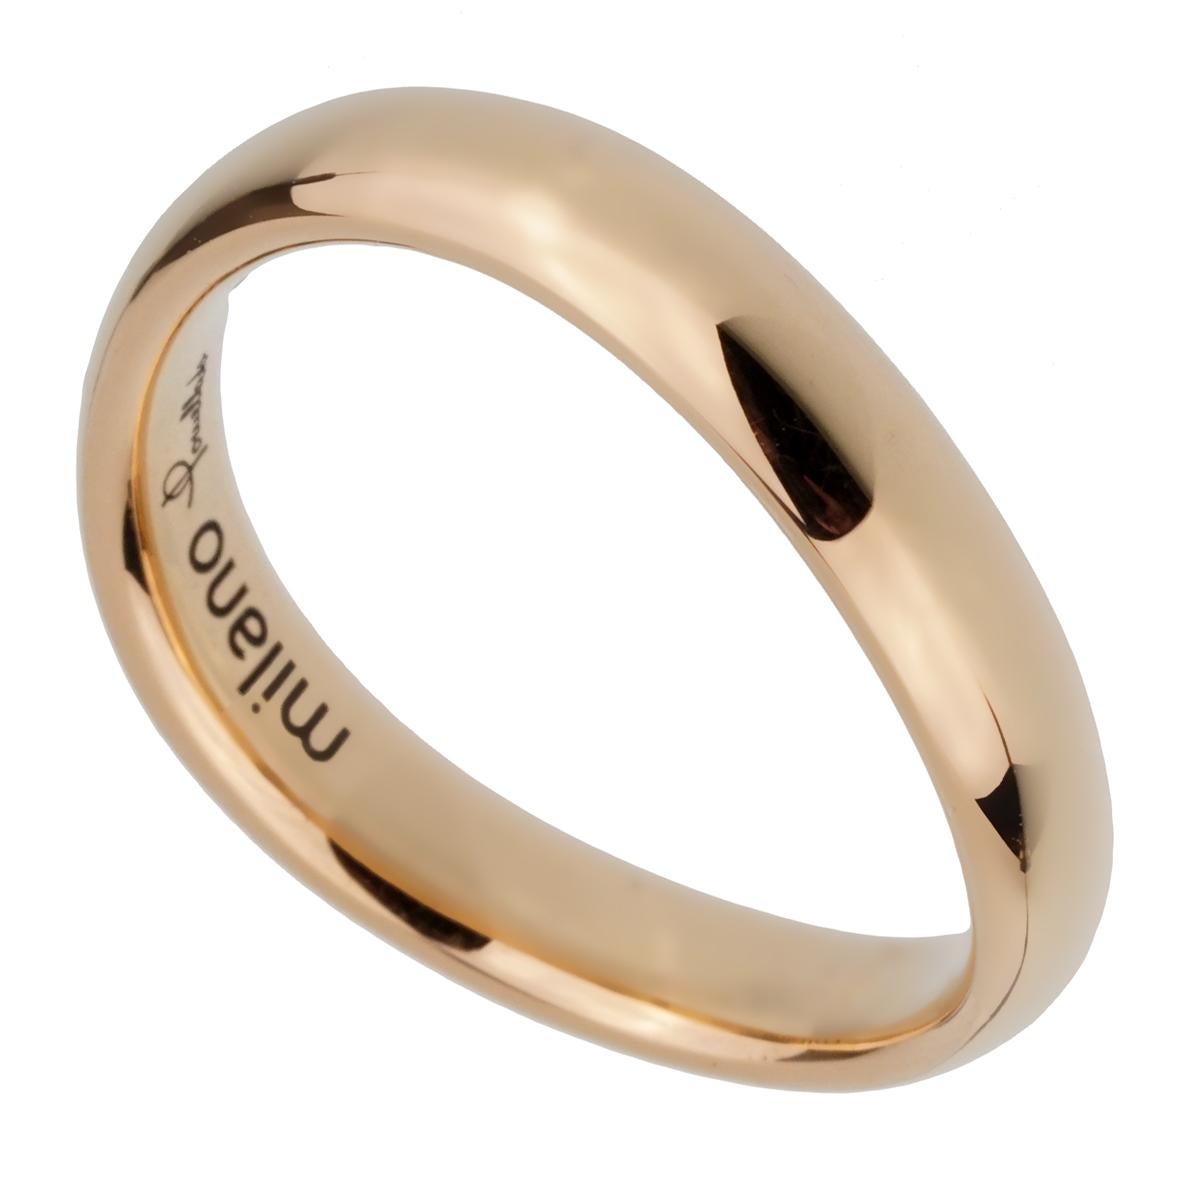 A chic Pomellato wave style band crafted in 18k rose gold, the ring measures a size 6.25 and can be resized.

Pomellato Retail Price: $1200
Sku: 2396